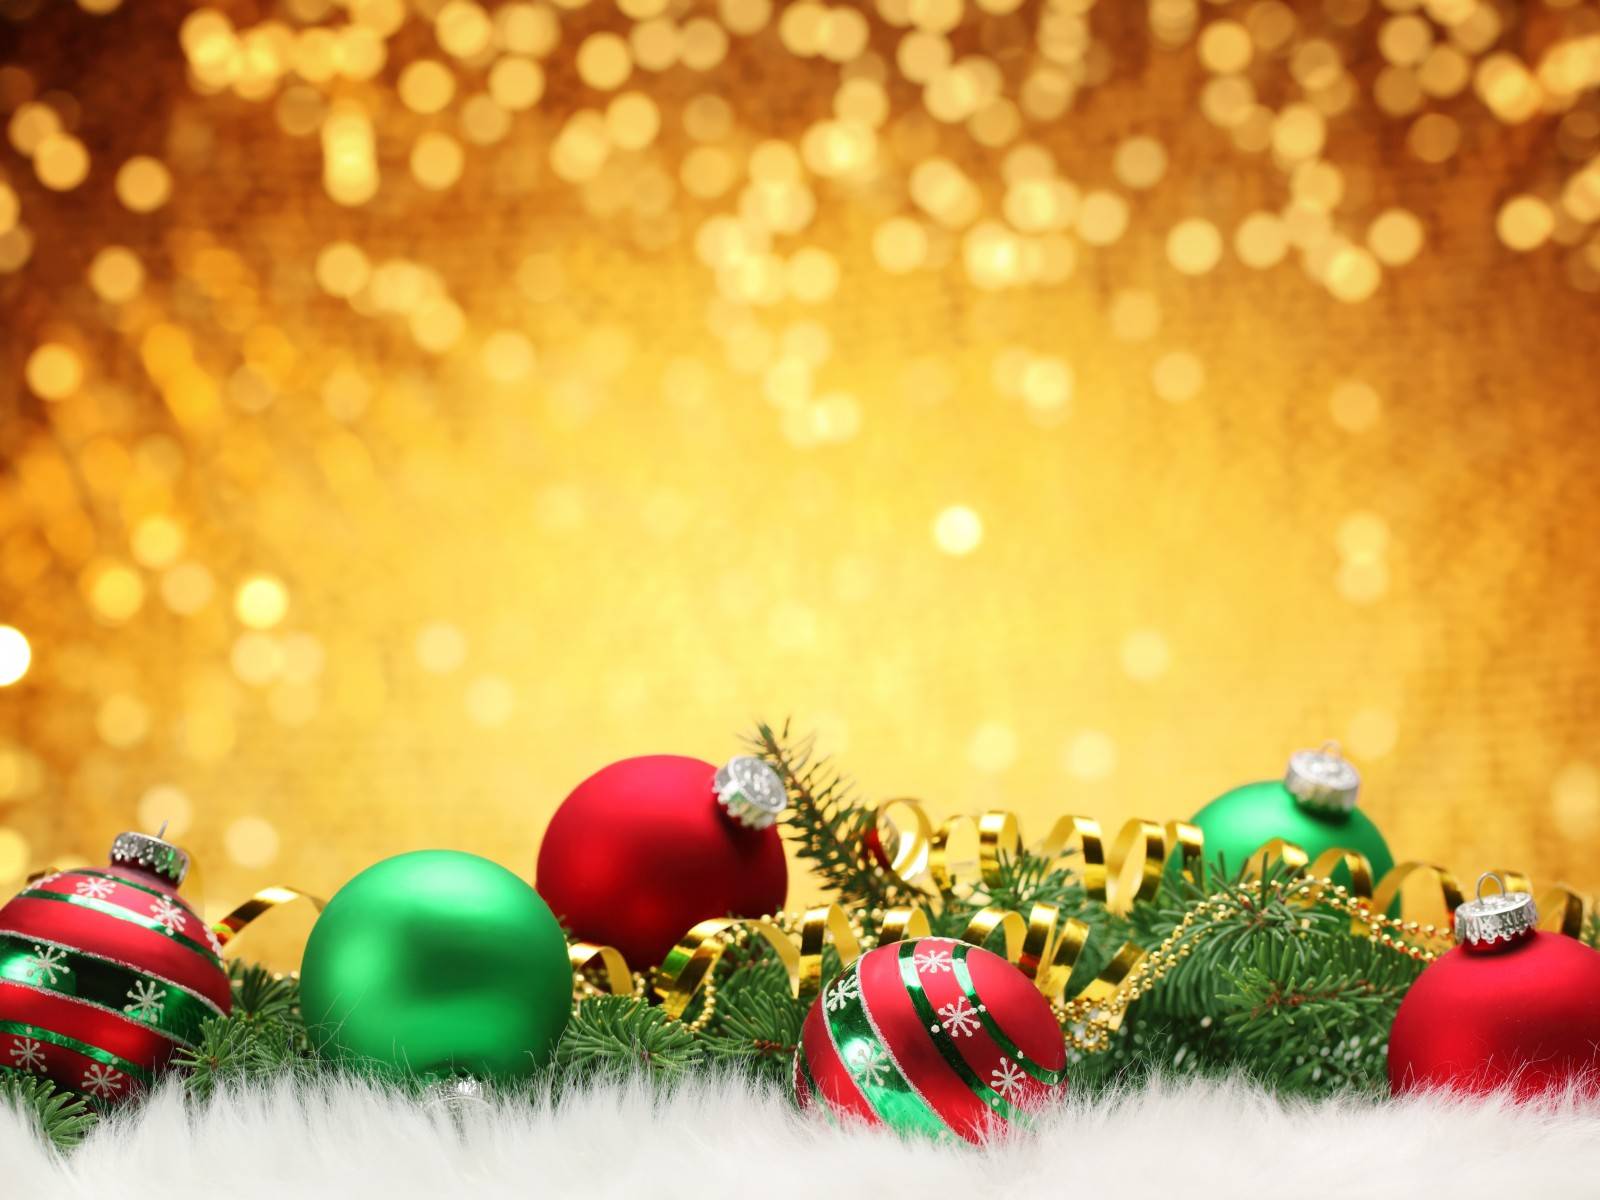 72+] Free Christmas Backgrounds Wallpaper